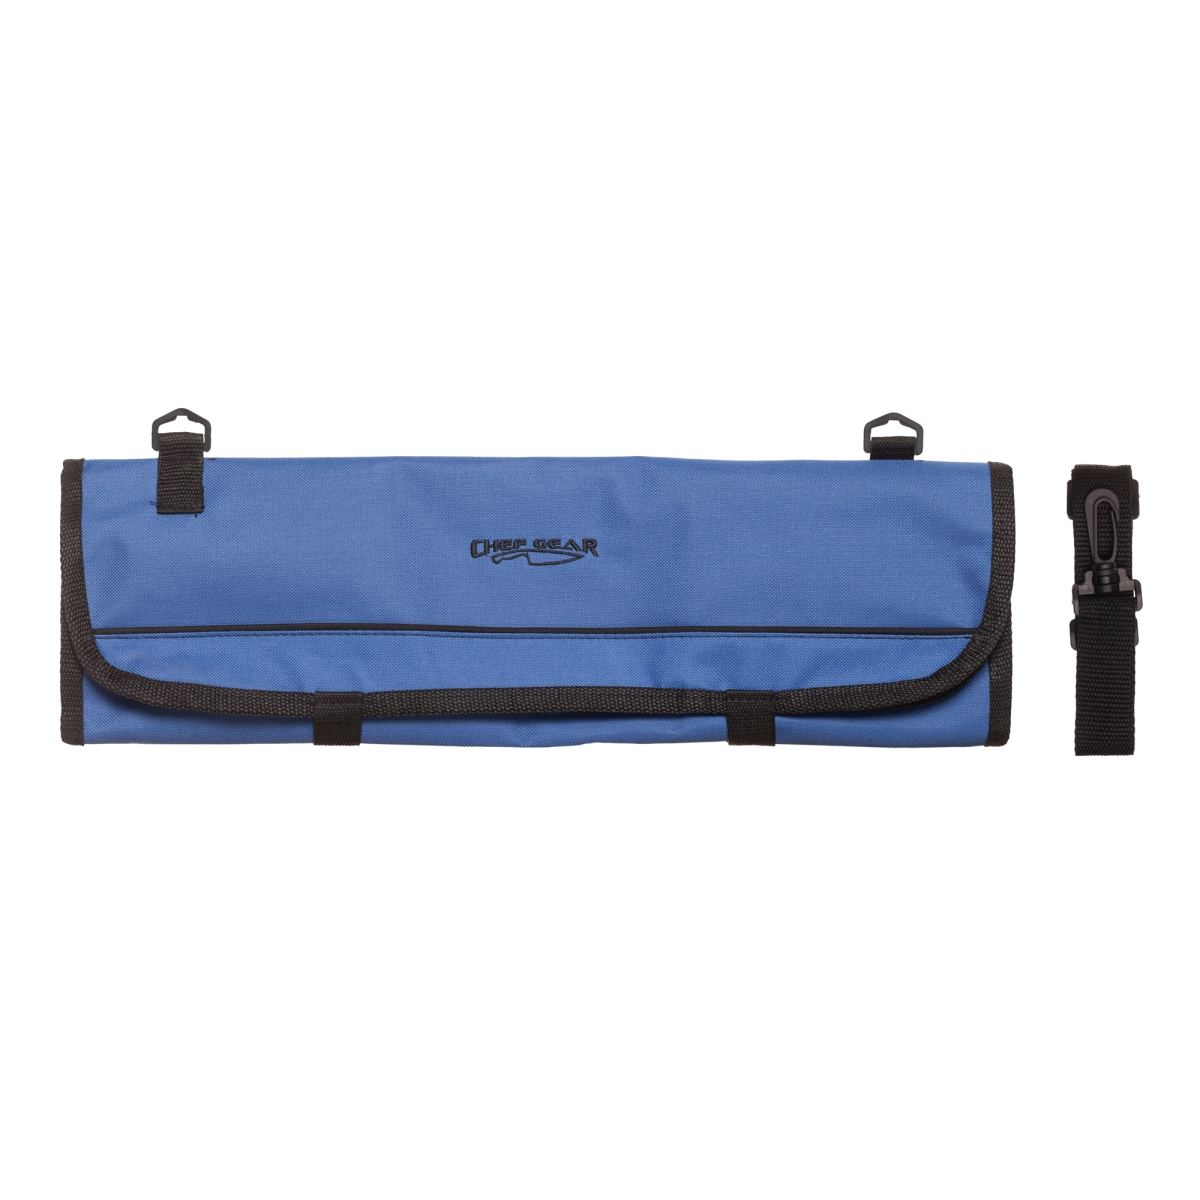 Picture of Ergo Chef 1009B 9 Pocket Chef Gear Knife Roll Bag - Blue